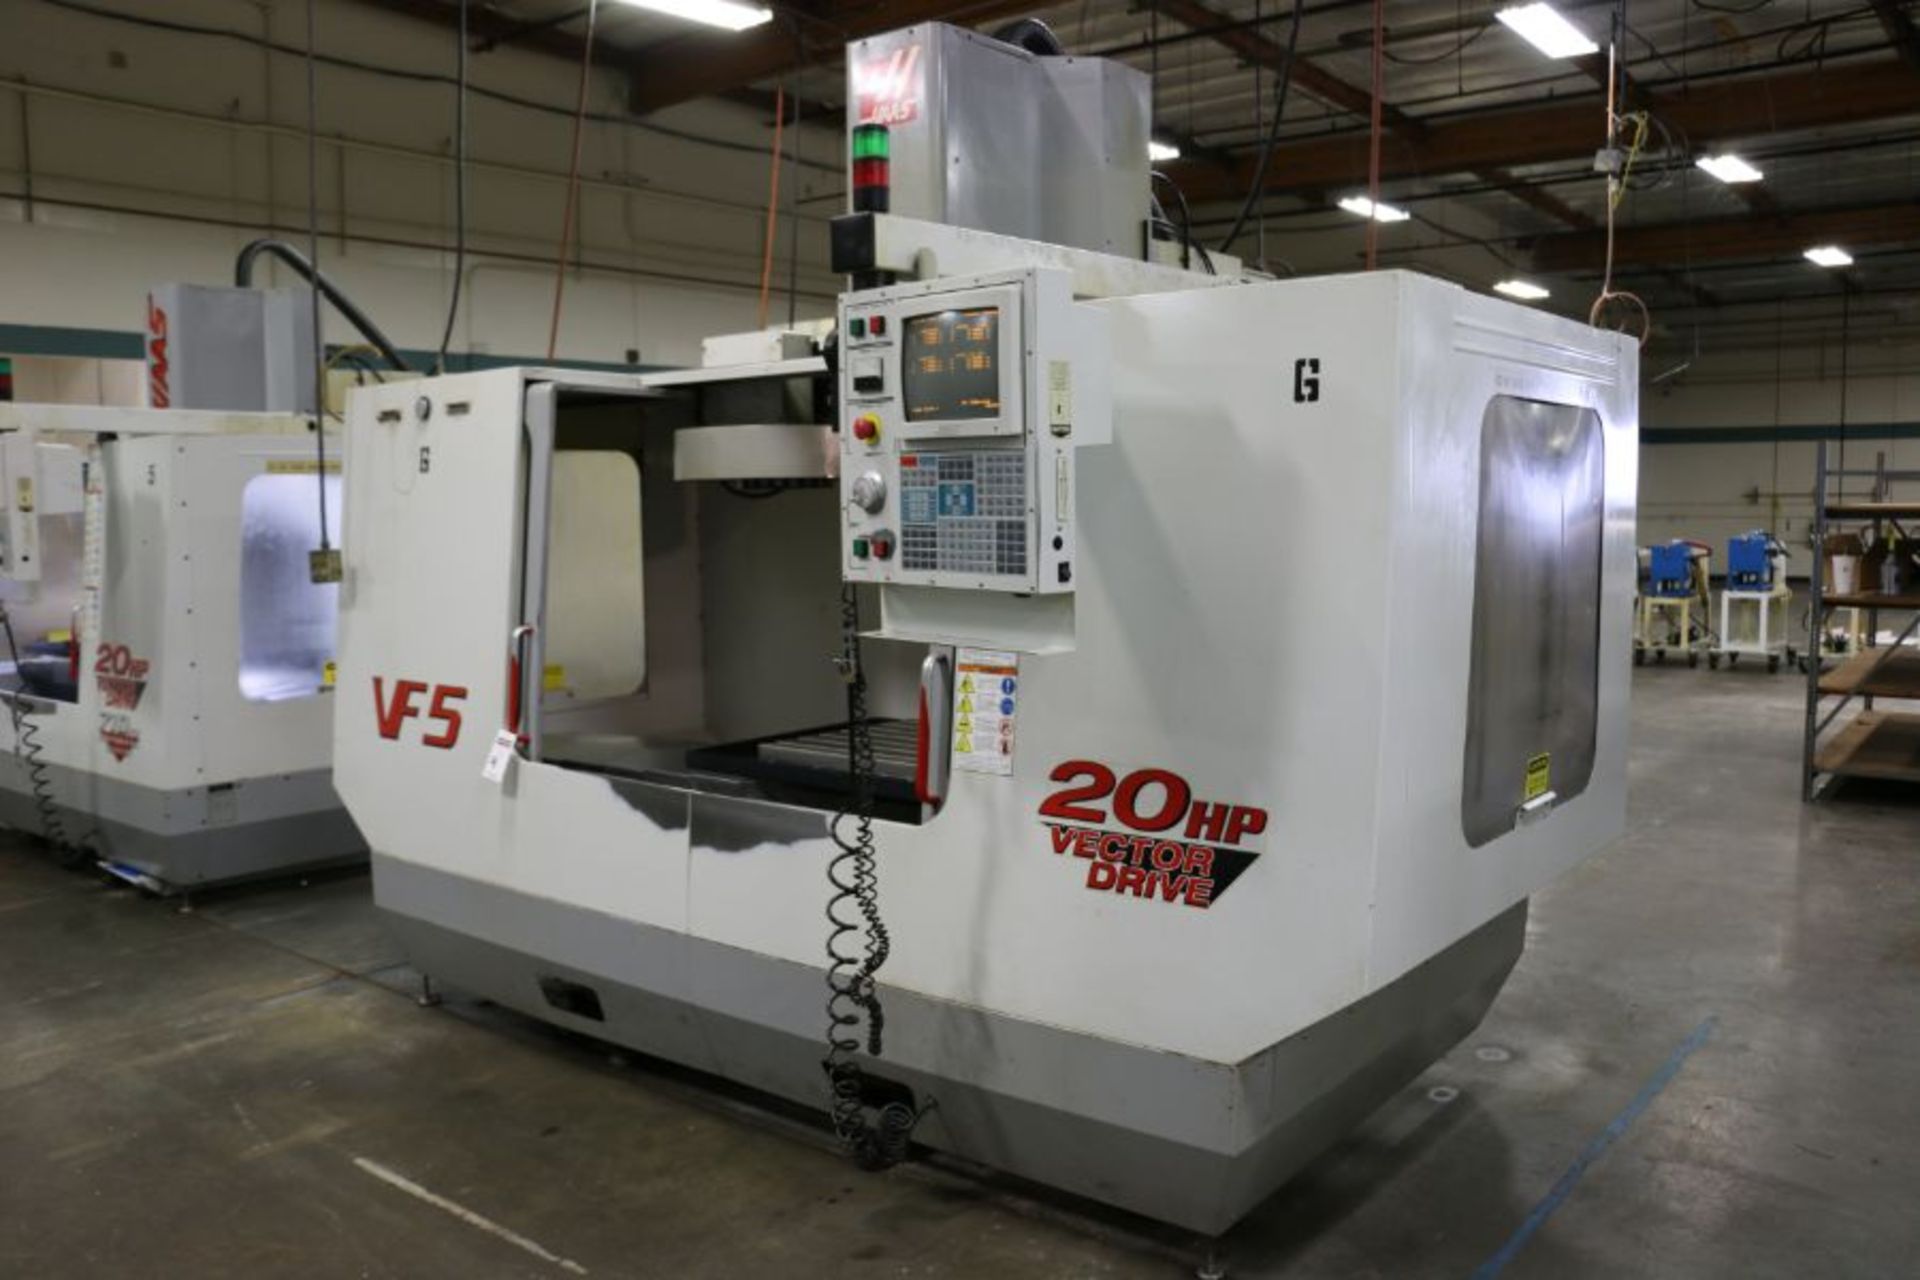 Haas VF-5, 50” x 26” x 25” Travels, 20 Position Tool Carousel, CT-40 Taper, s/n 19337, New 2000 - Image 6 of 13